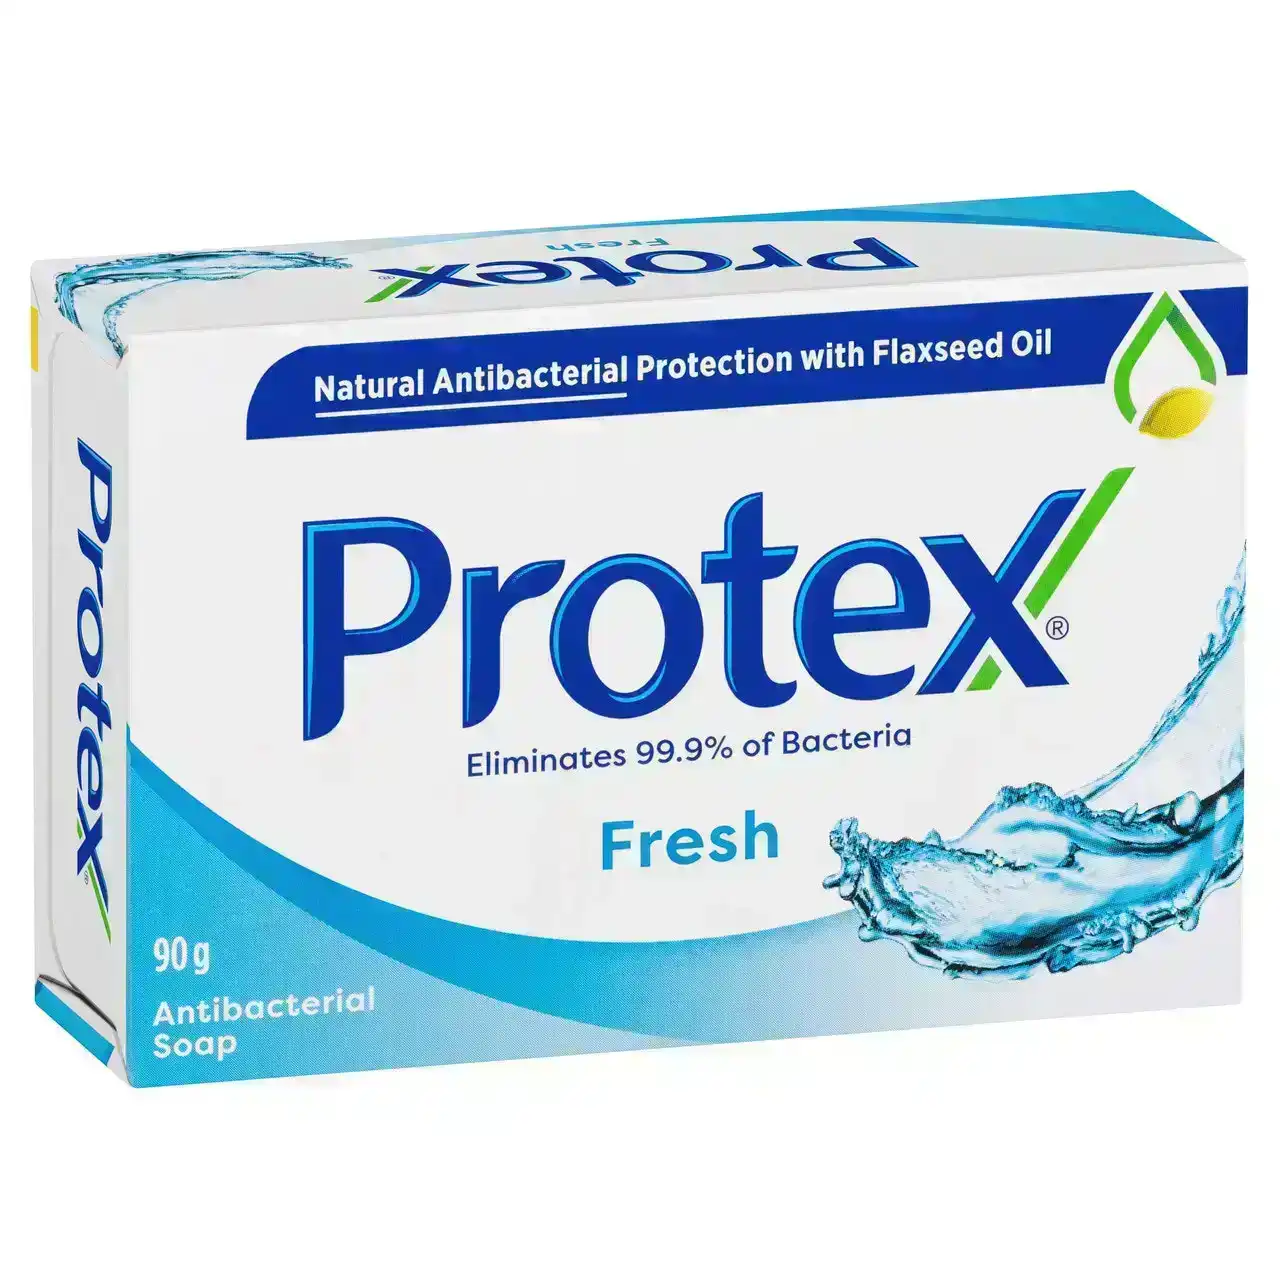 Protex Fresh Antibacterial Bar Soap Long Lasting Freshness Dermatologist Tested Recyclable 90g